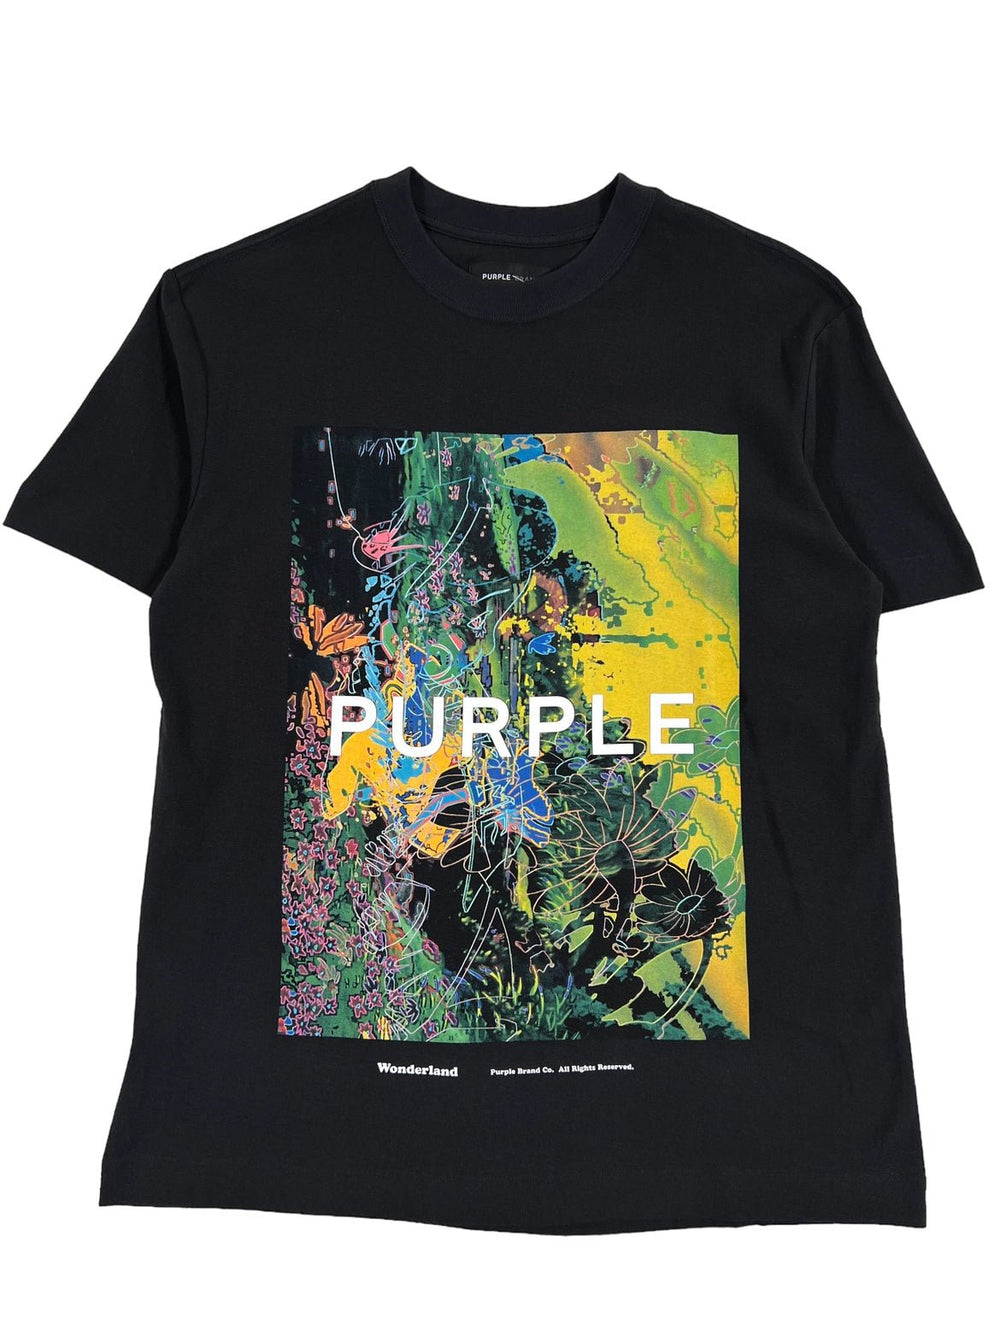 A comfortable, black graphic t-shirt with the word "purple" from the PURPLE BRAND P104-JBBO TEXTURED JERSEY SS TEE BLACK on it.